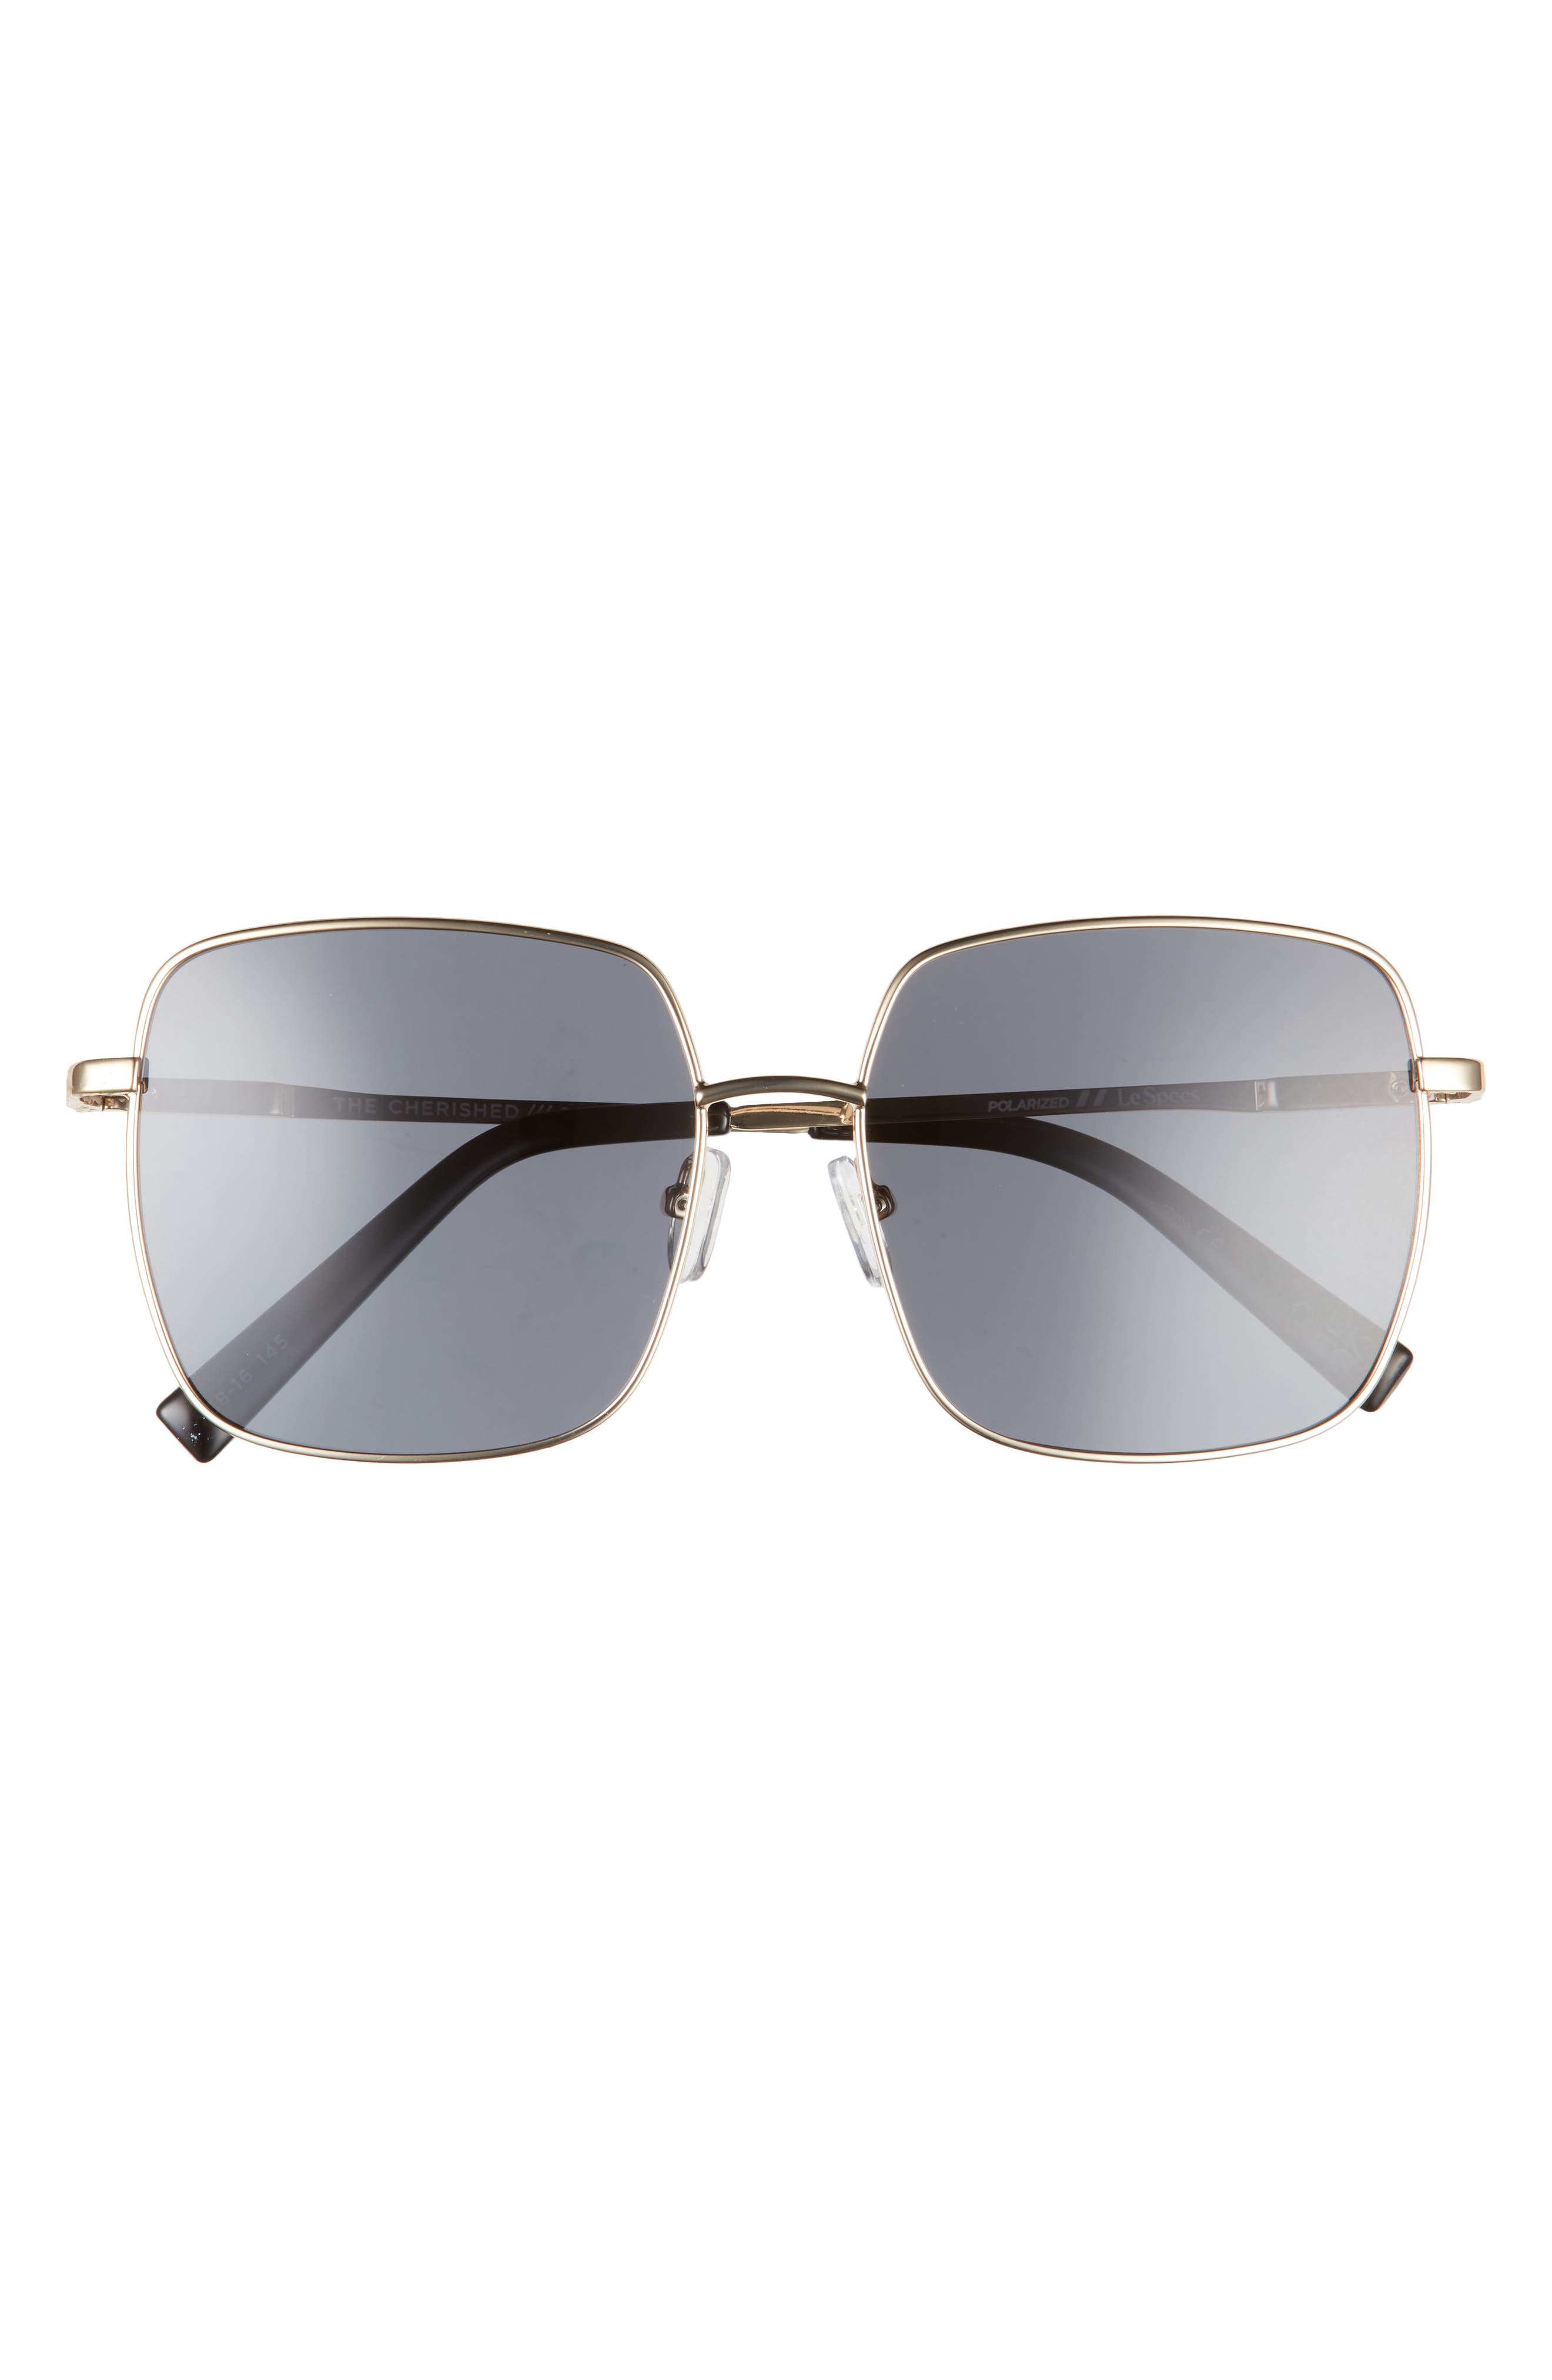 Le Specs The Cherished 58mm Square Sunglasses in Gold/Smoke Mono Polarized at Nordstrom